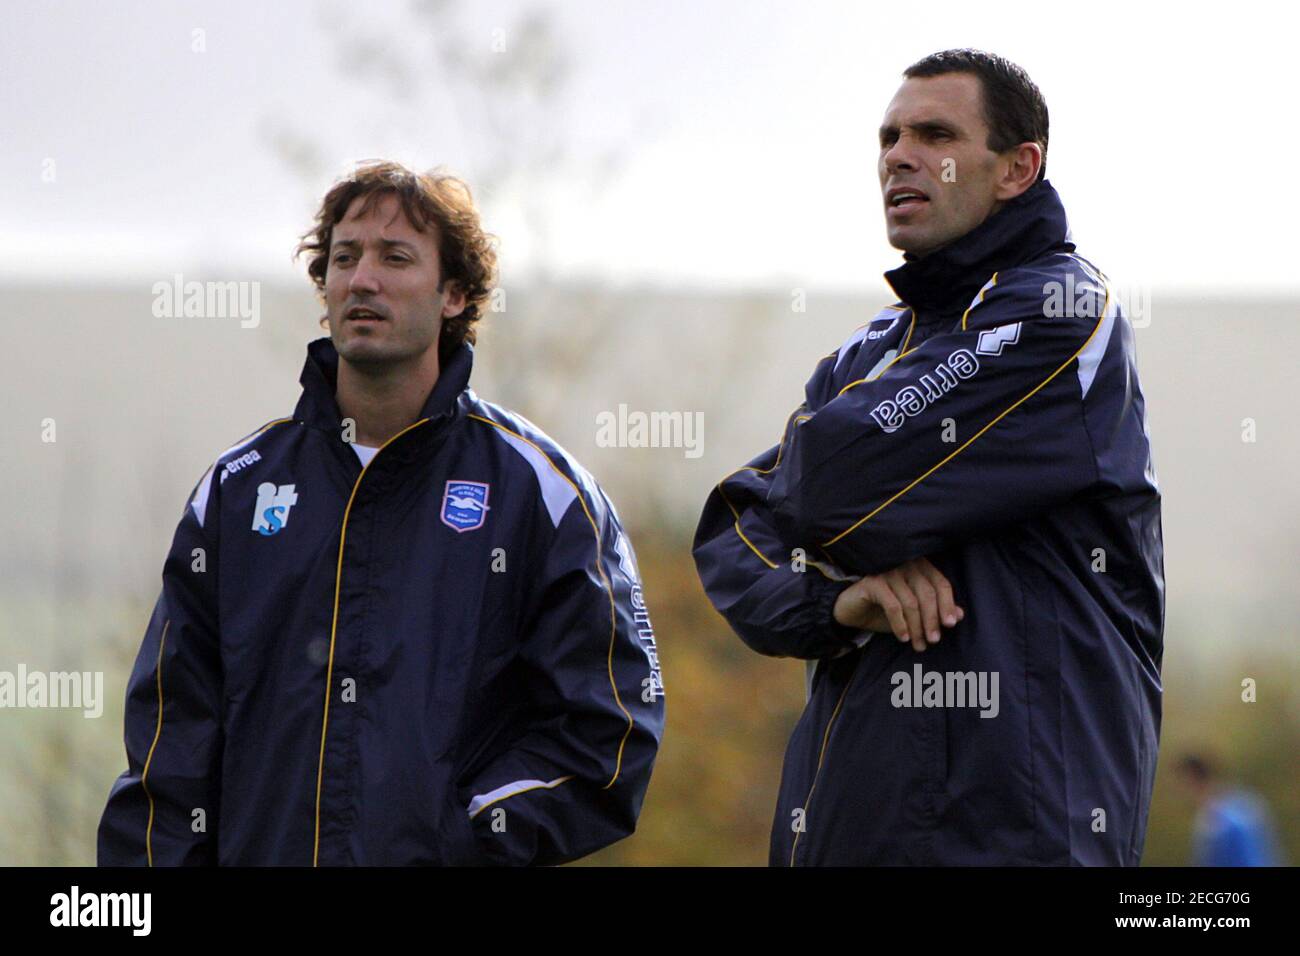 Football - Brighton Training - Brighton -  09/10 - 12/11/09  Brighton Assistant manager Mauricio Taricco (L) with manager Gustavo Poyet during training  Mandatory Credit: Action Images  Livepic Stock Photo